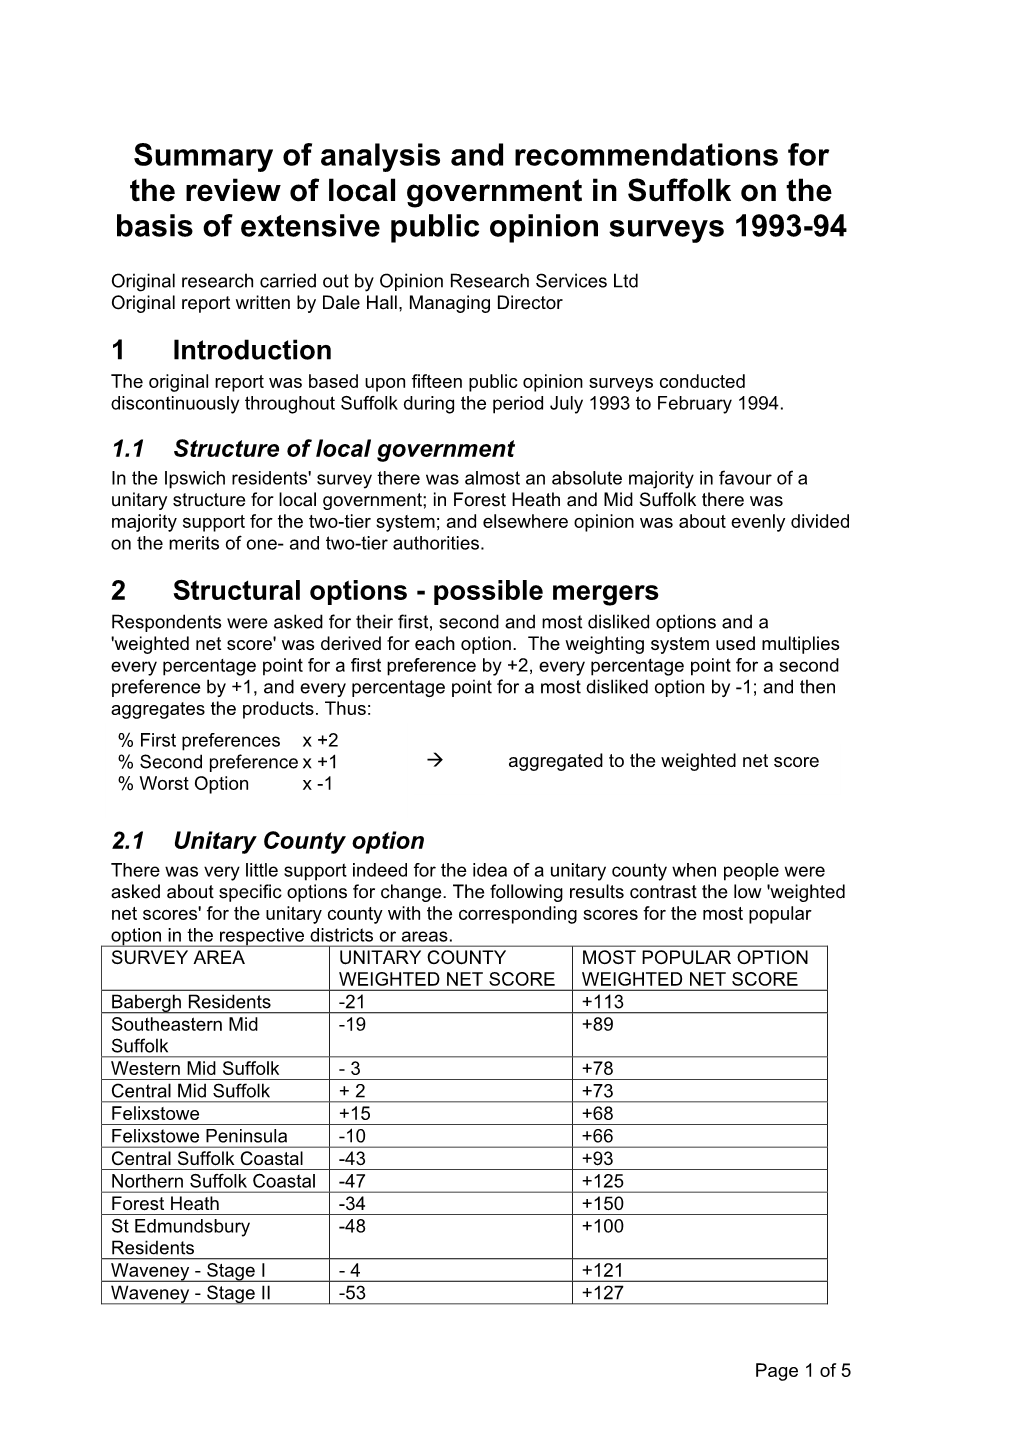 Summary of Analysis and Recommendations for the Review of Local Government in Suffolk on the Basis of Extensive Public Opinion Surveys 1993-94